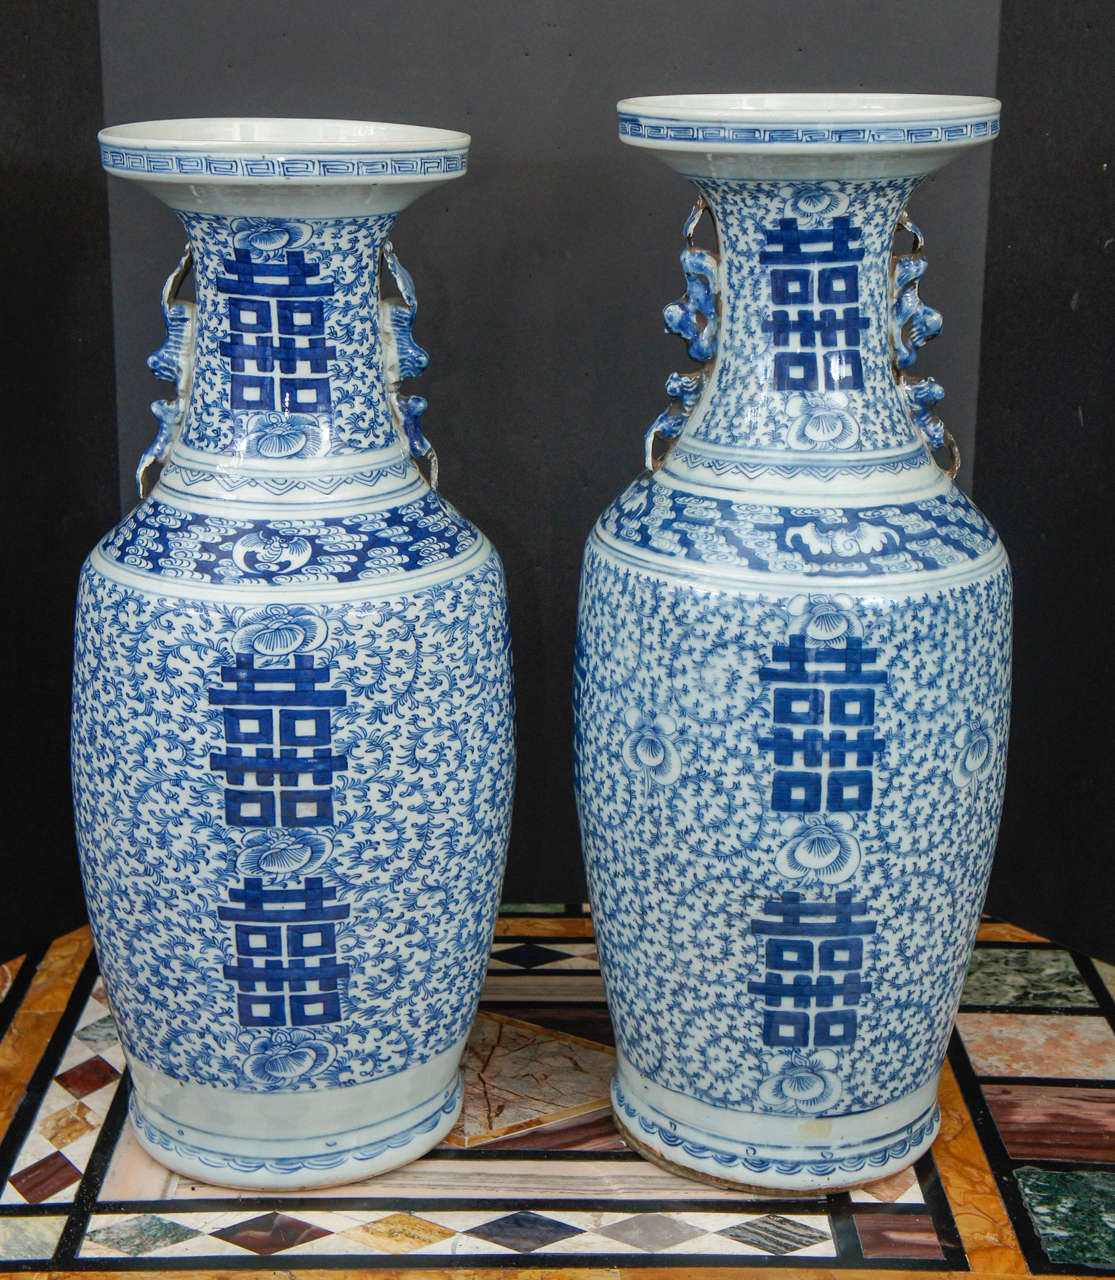 This large pair of vases with double happiness symbols was made in China in the very late 19th century or possibly within the first decade of the republic period. Made as export wares to be sent abroad the color of the blue is deep and rich. While